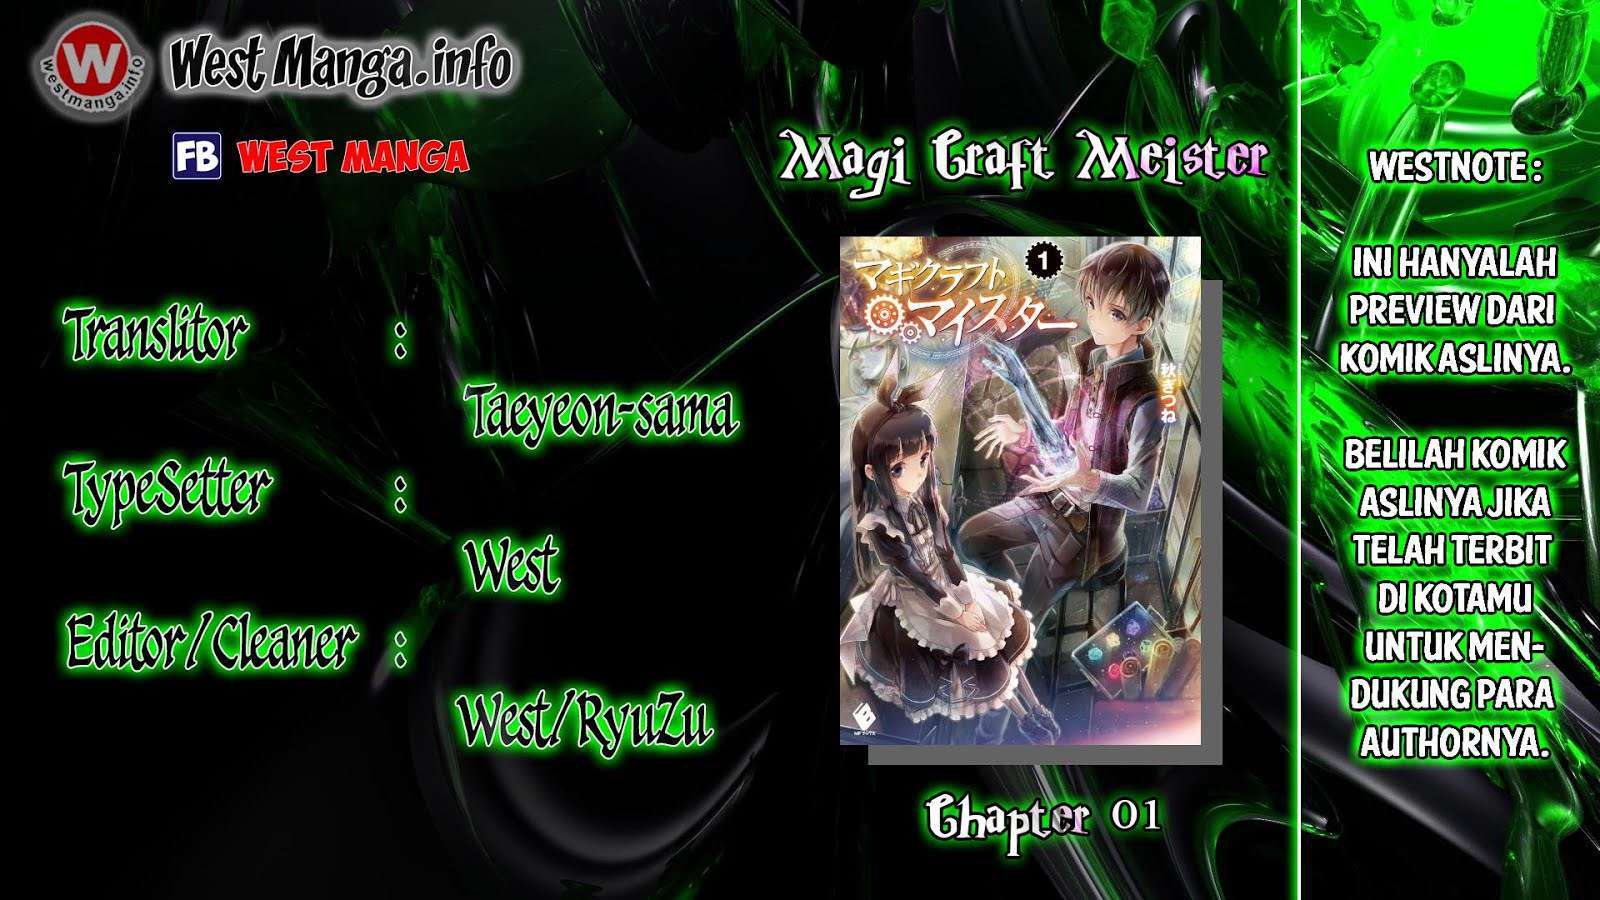 Magi Craft Meister  Chapter 01